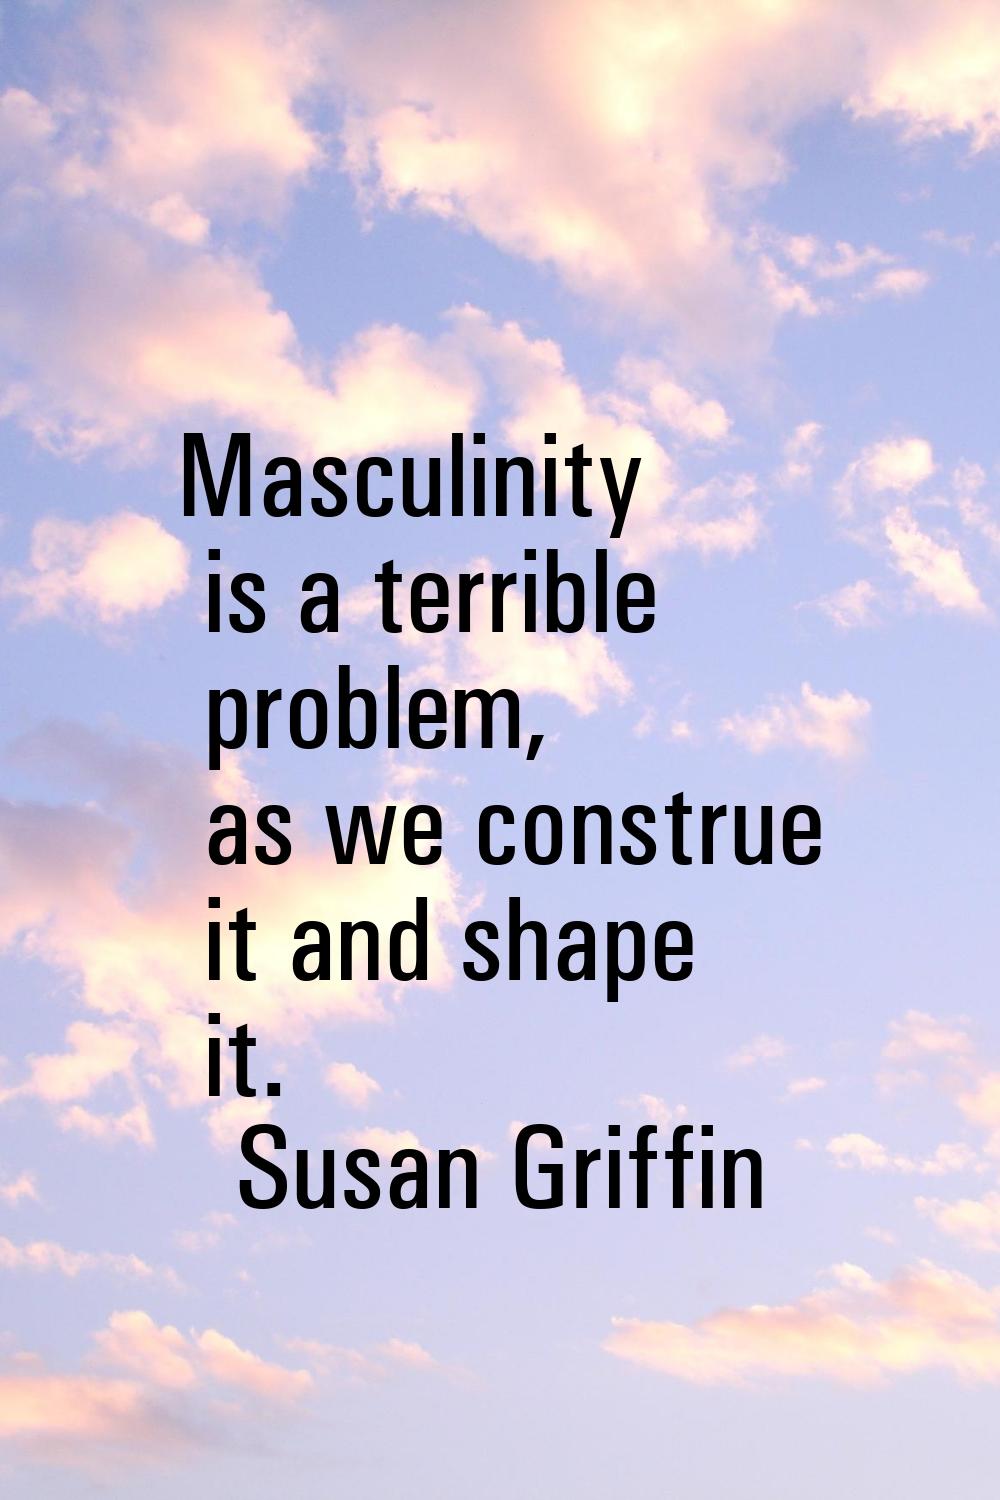 Masculinity is a terrible problem, as we construe it and shape it.